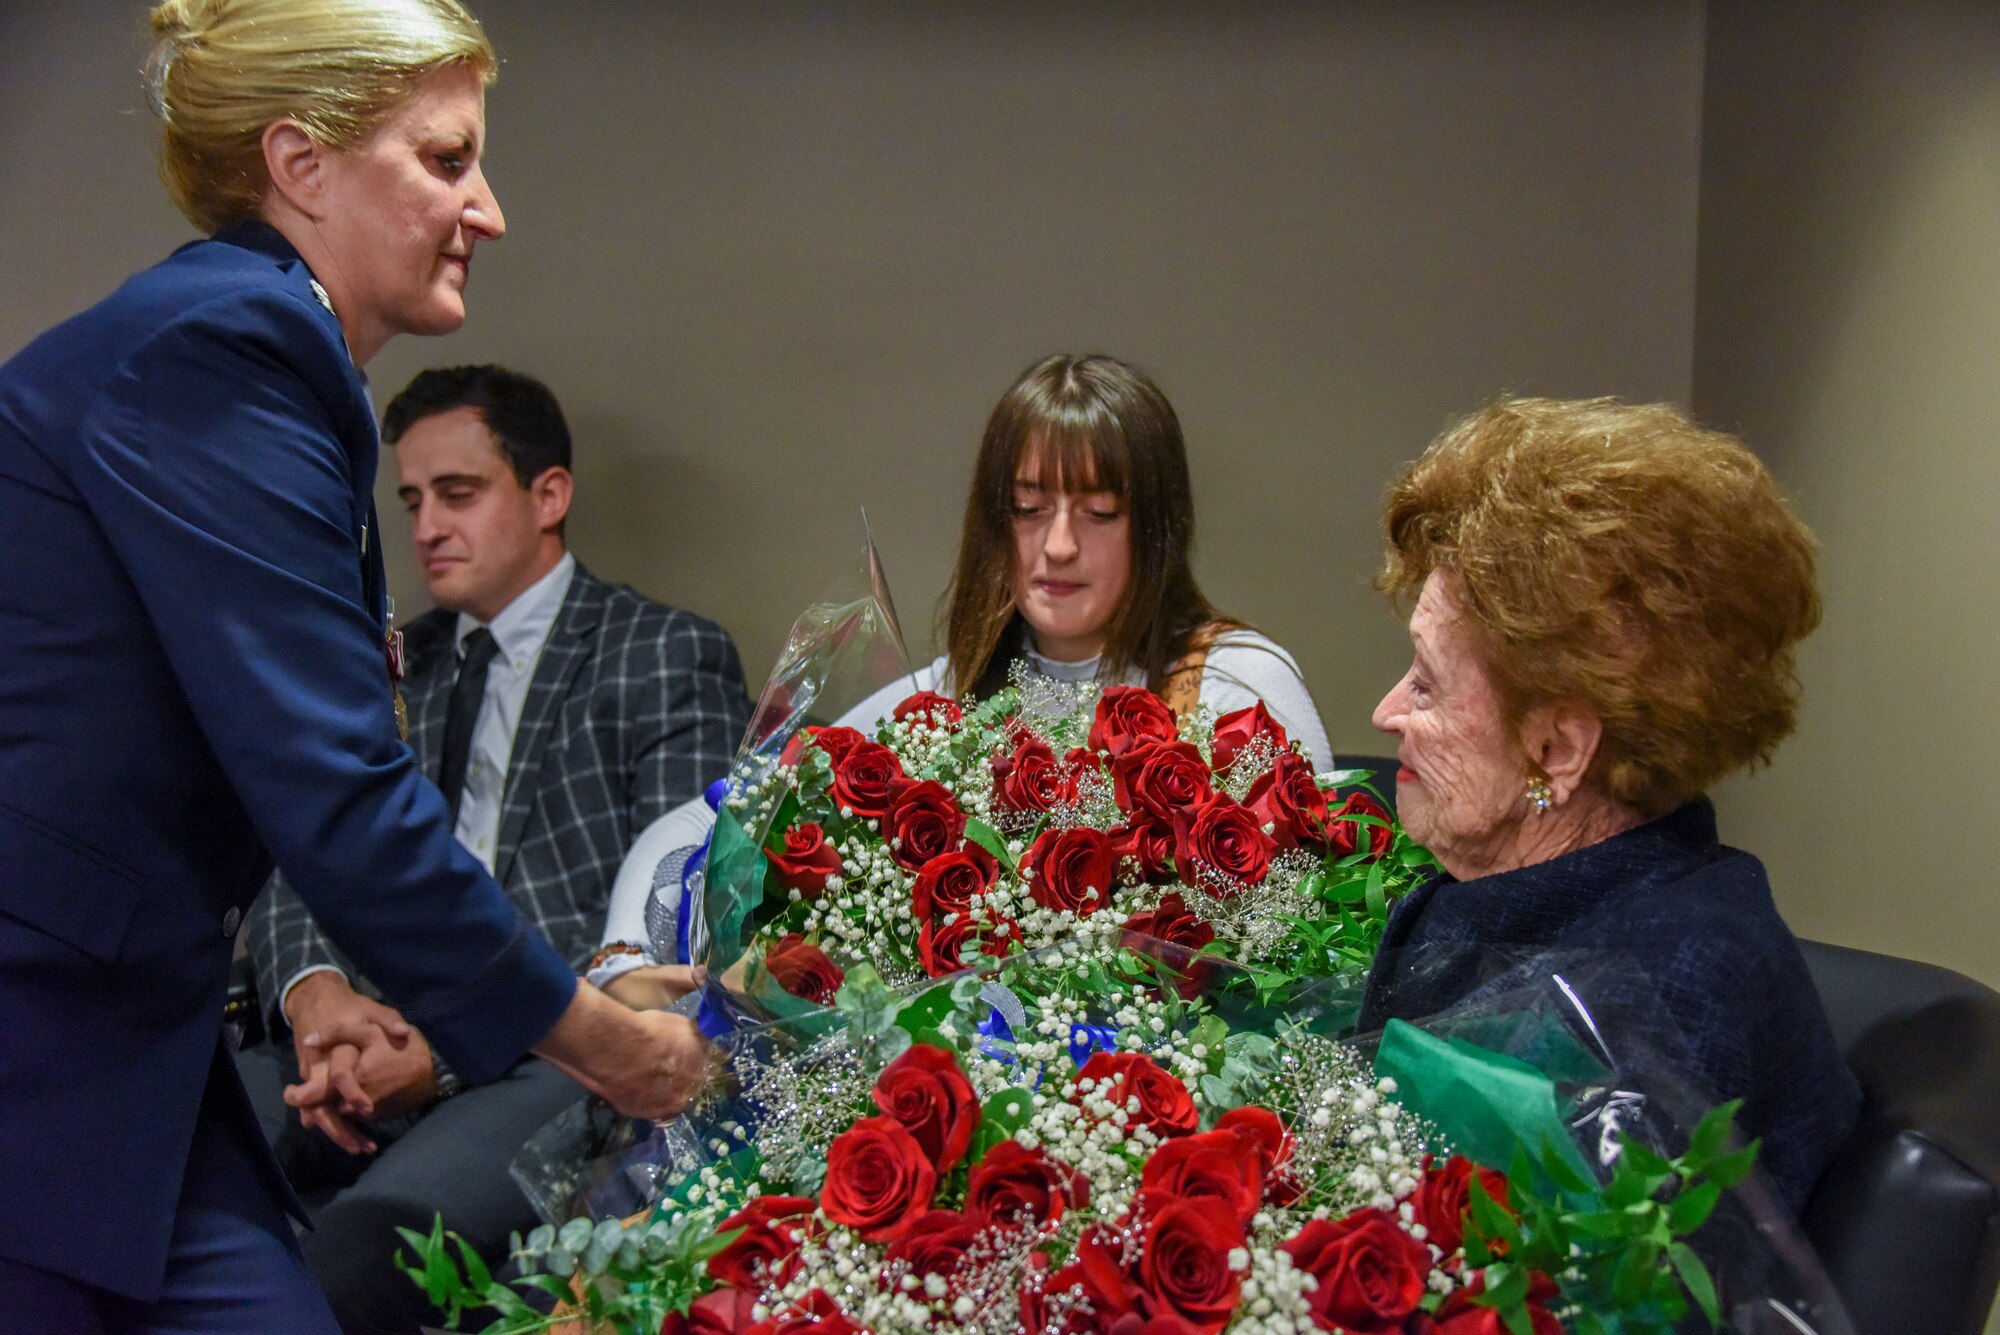 Lt. Col. Beth E. Bruker Walos, program administrator with the 911th Airlift Wing Inspector General inspections office, gives flowers to her mother during her retirement ceremony at the Pittsburgh International Airport Air Reserve Station, Pennsylvania, Nov. 2, 2019.